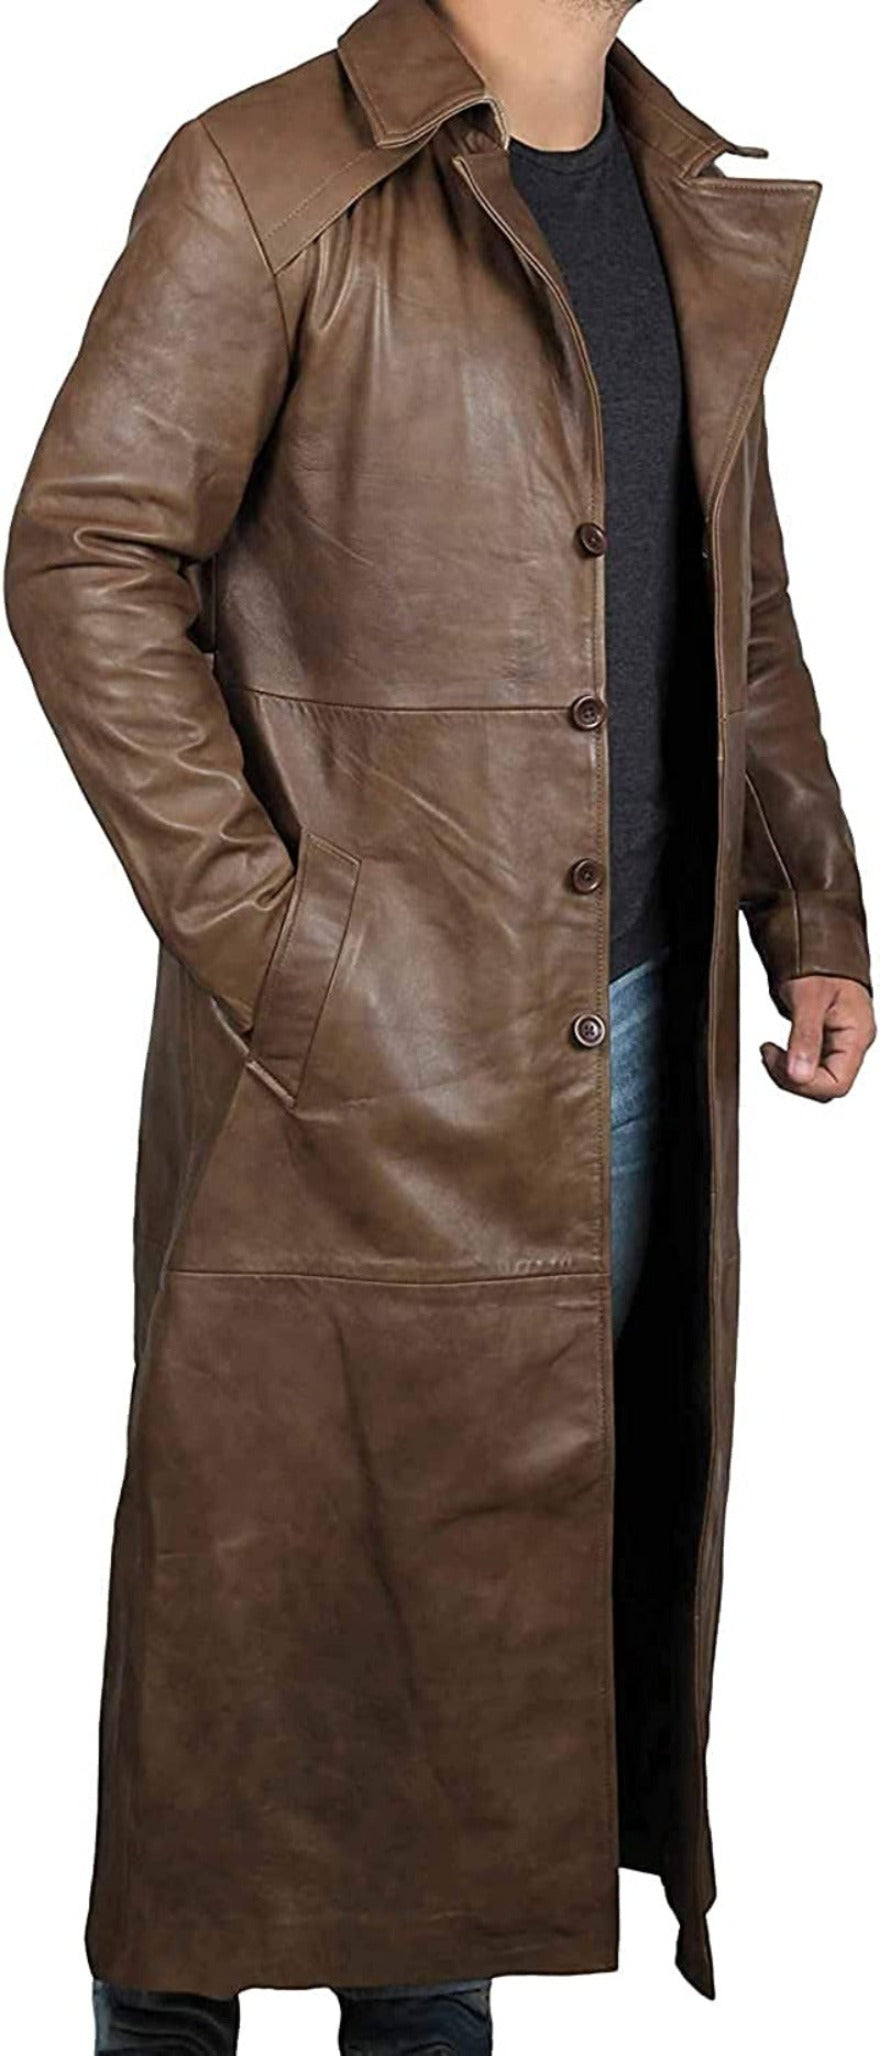 mens leather trench coat full length, side view  light brown distressed color